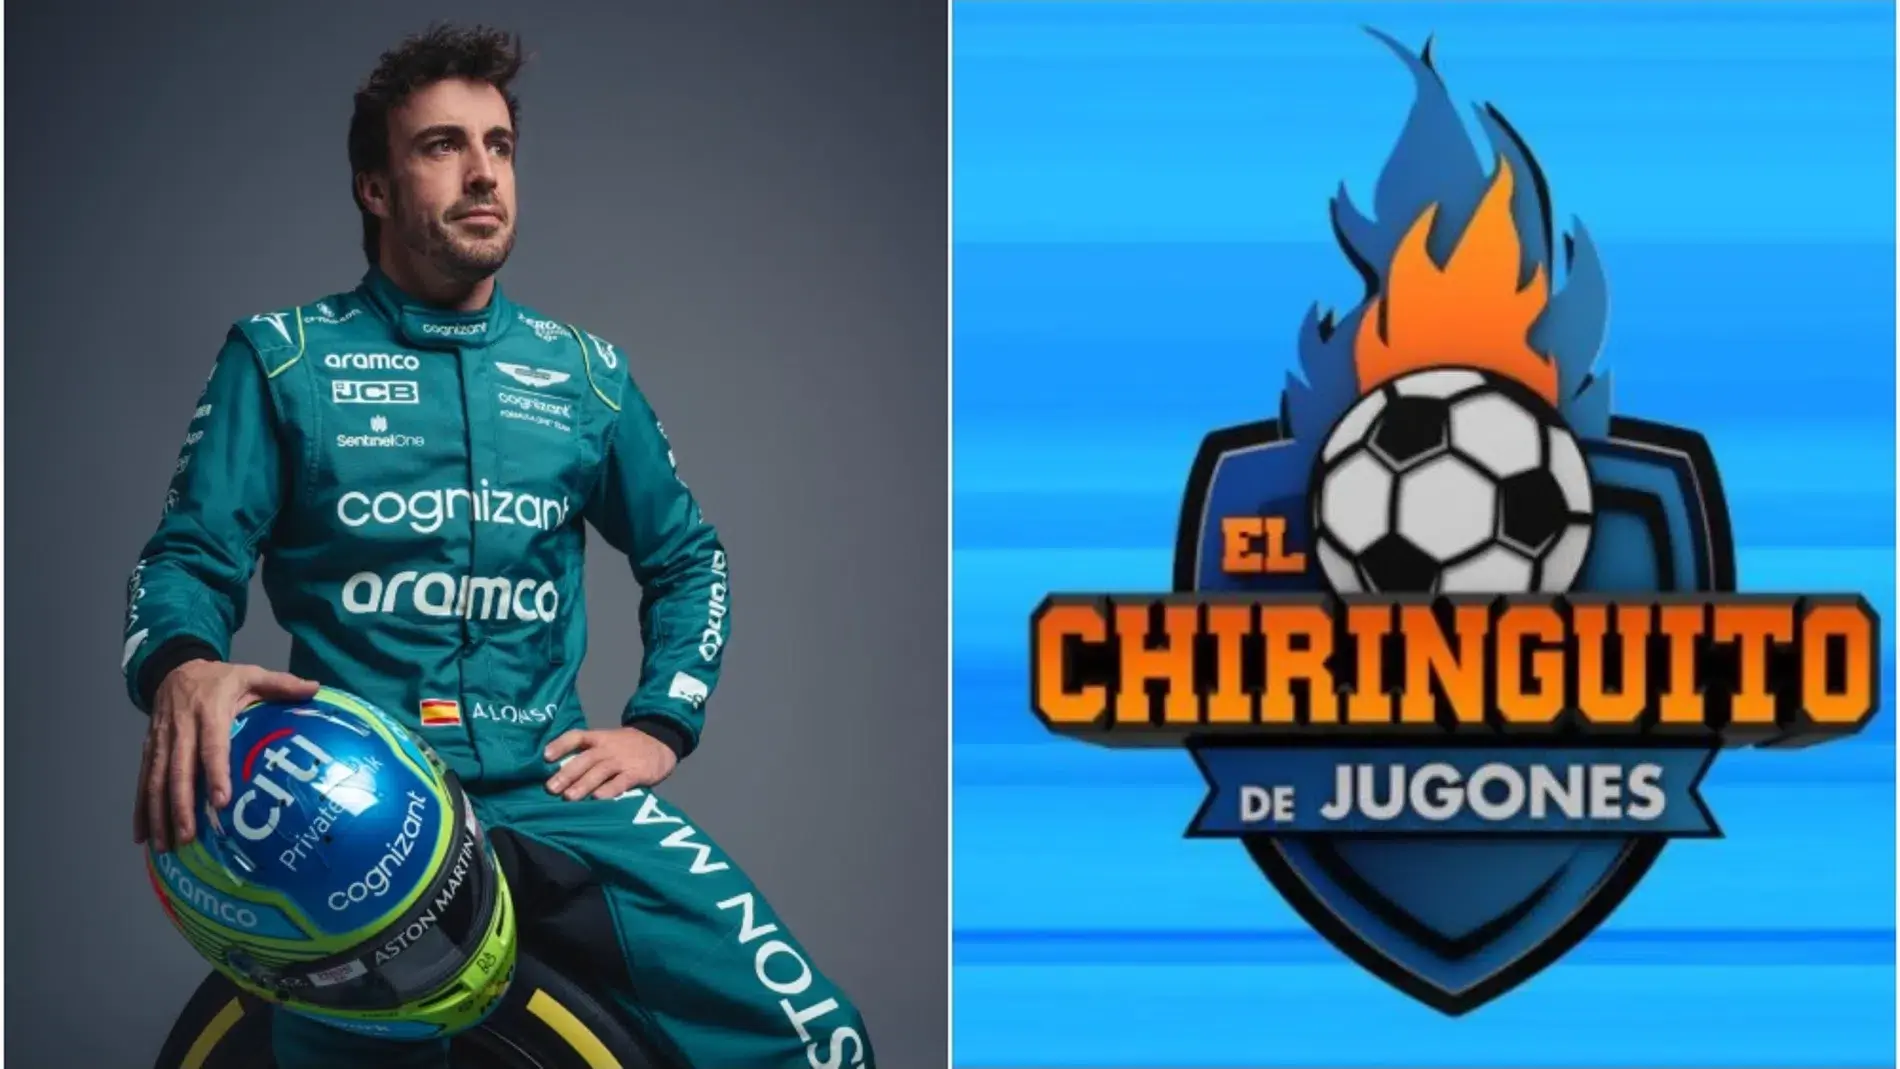 El Chiringuito expert explains the difference between Fernando Alonso and Carlos Sainz
